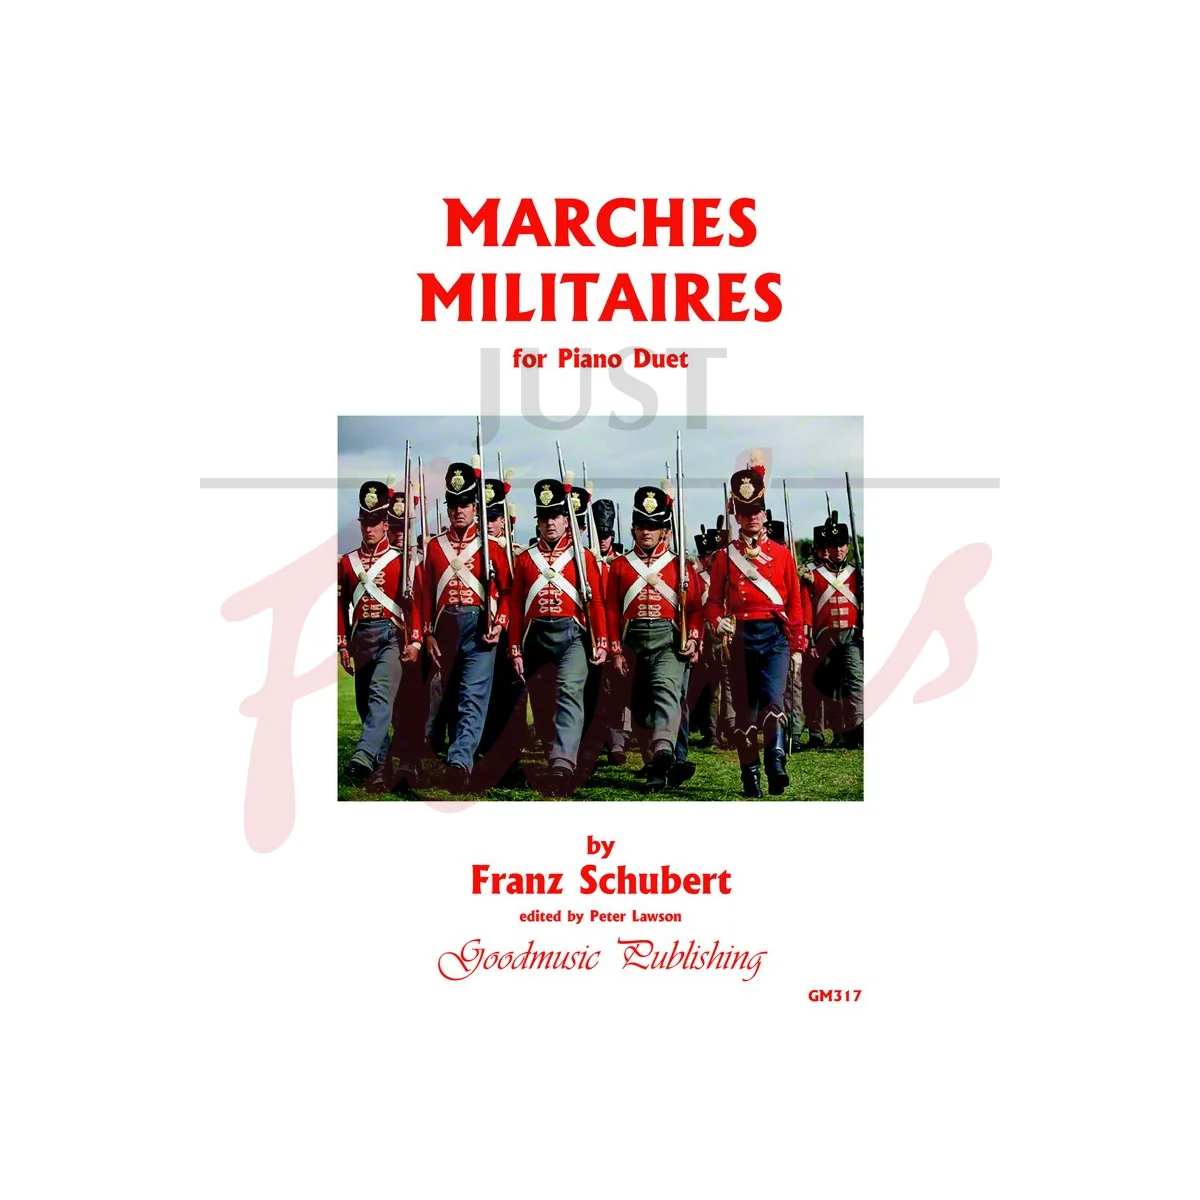 Marches Militaires for Piano Duet